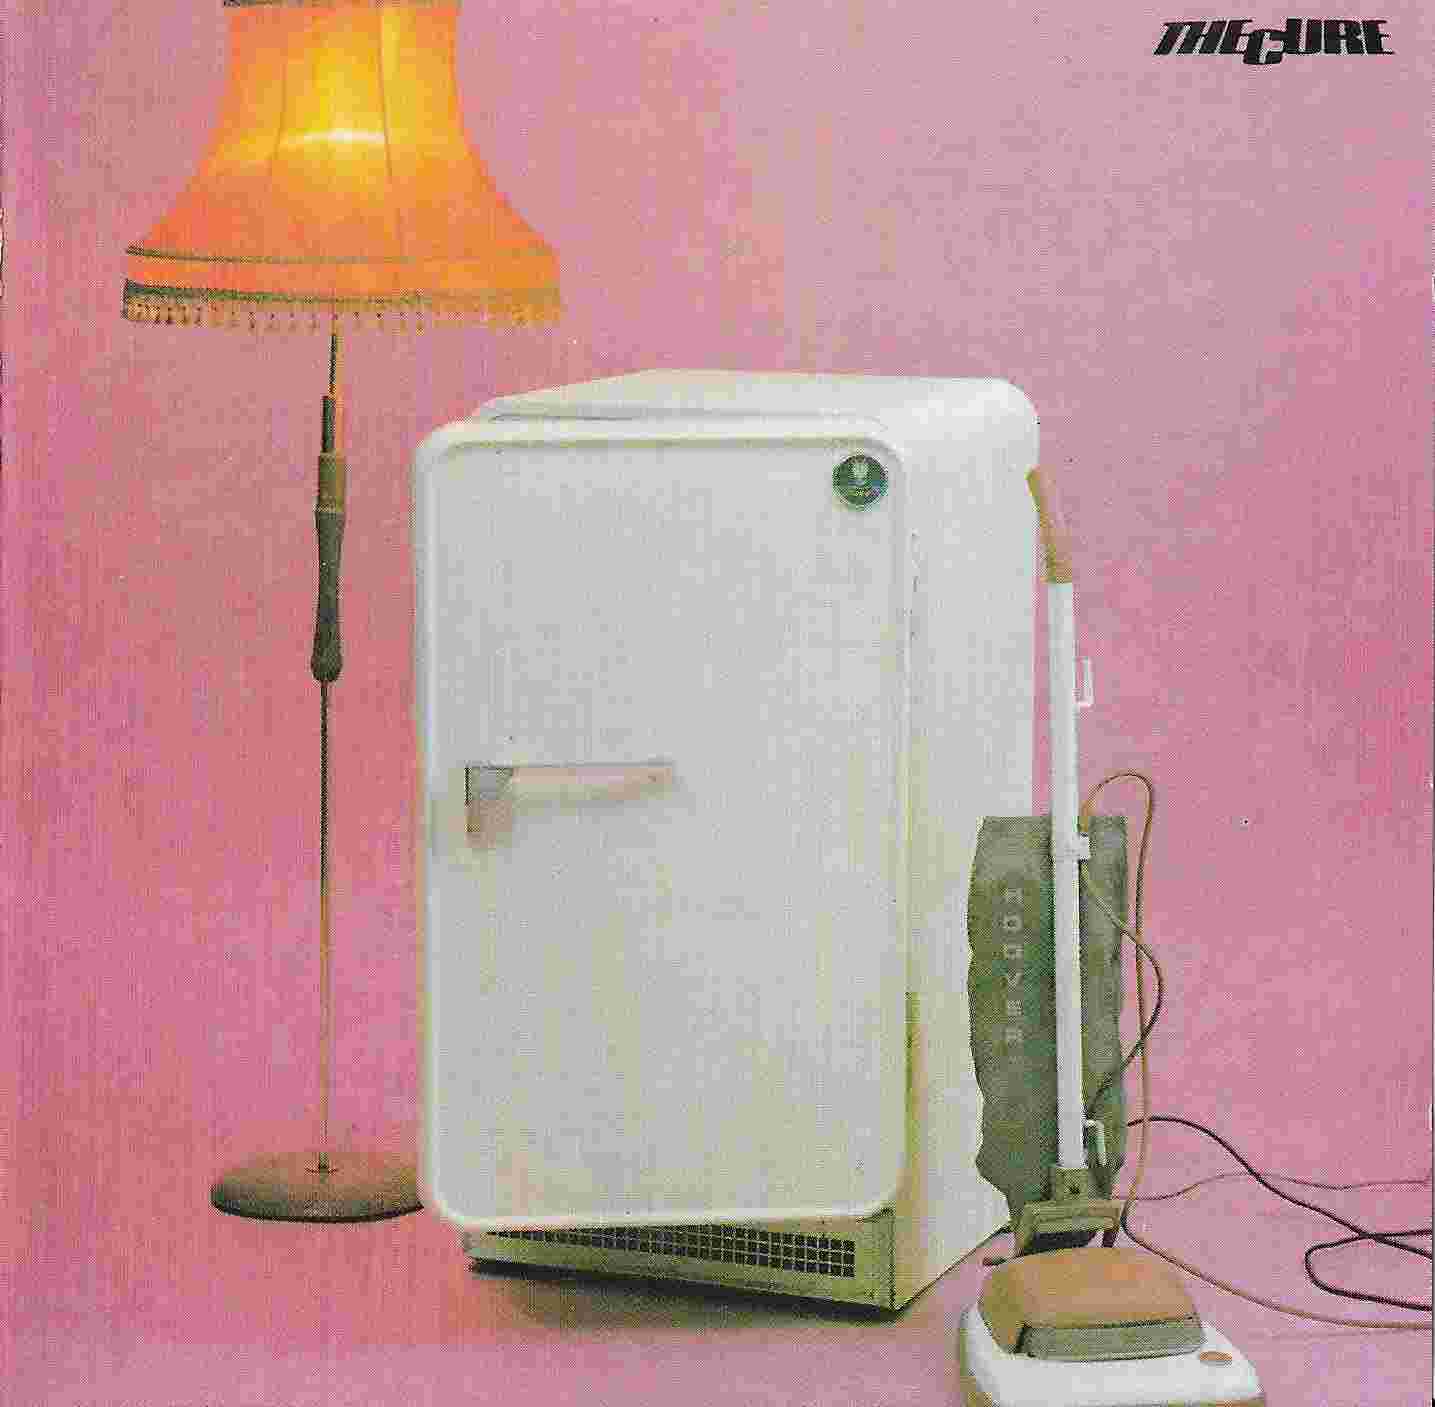 Picture of 827686 - 2 Three imaginary boys by artist The Cure 